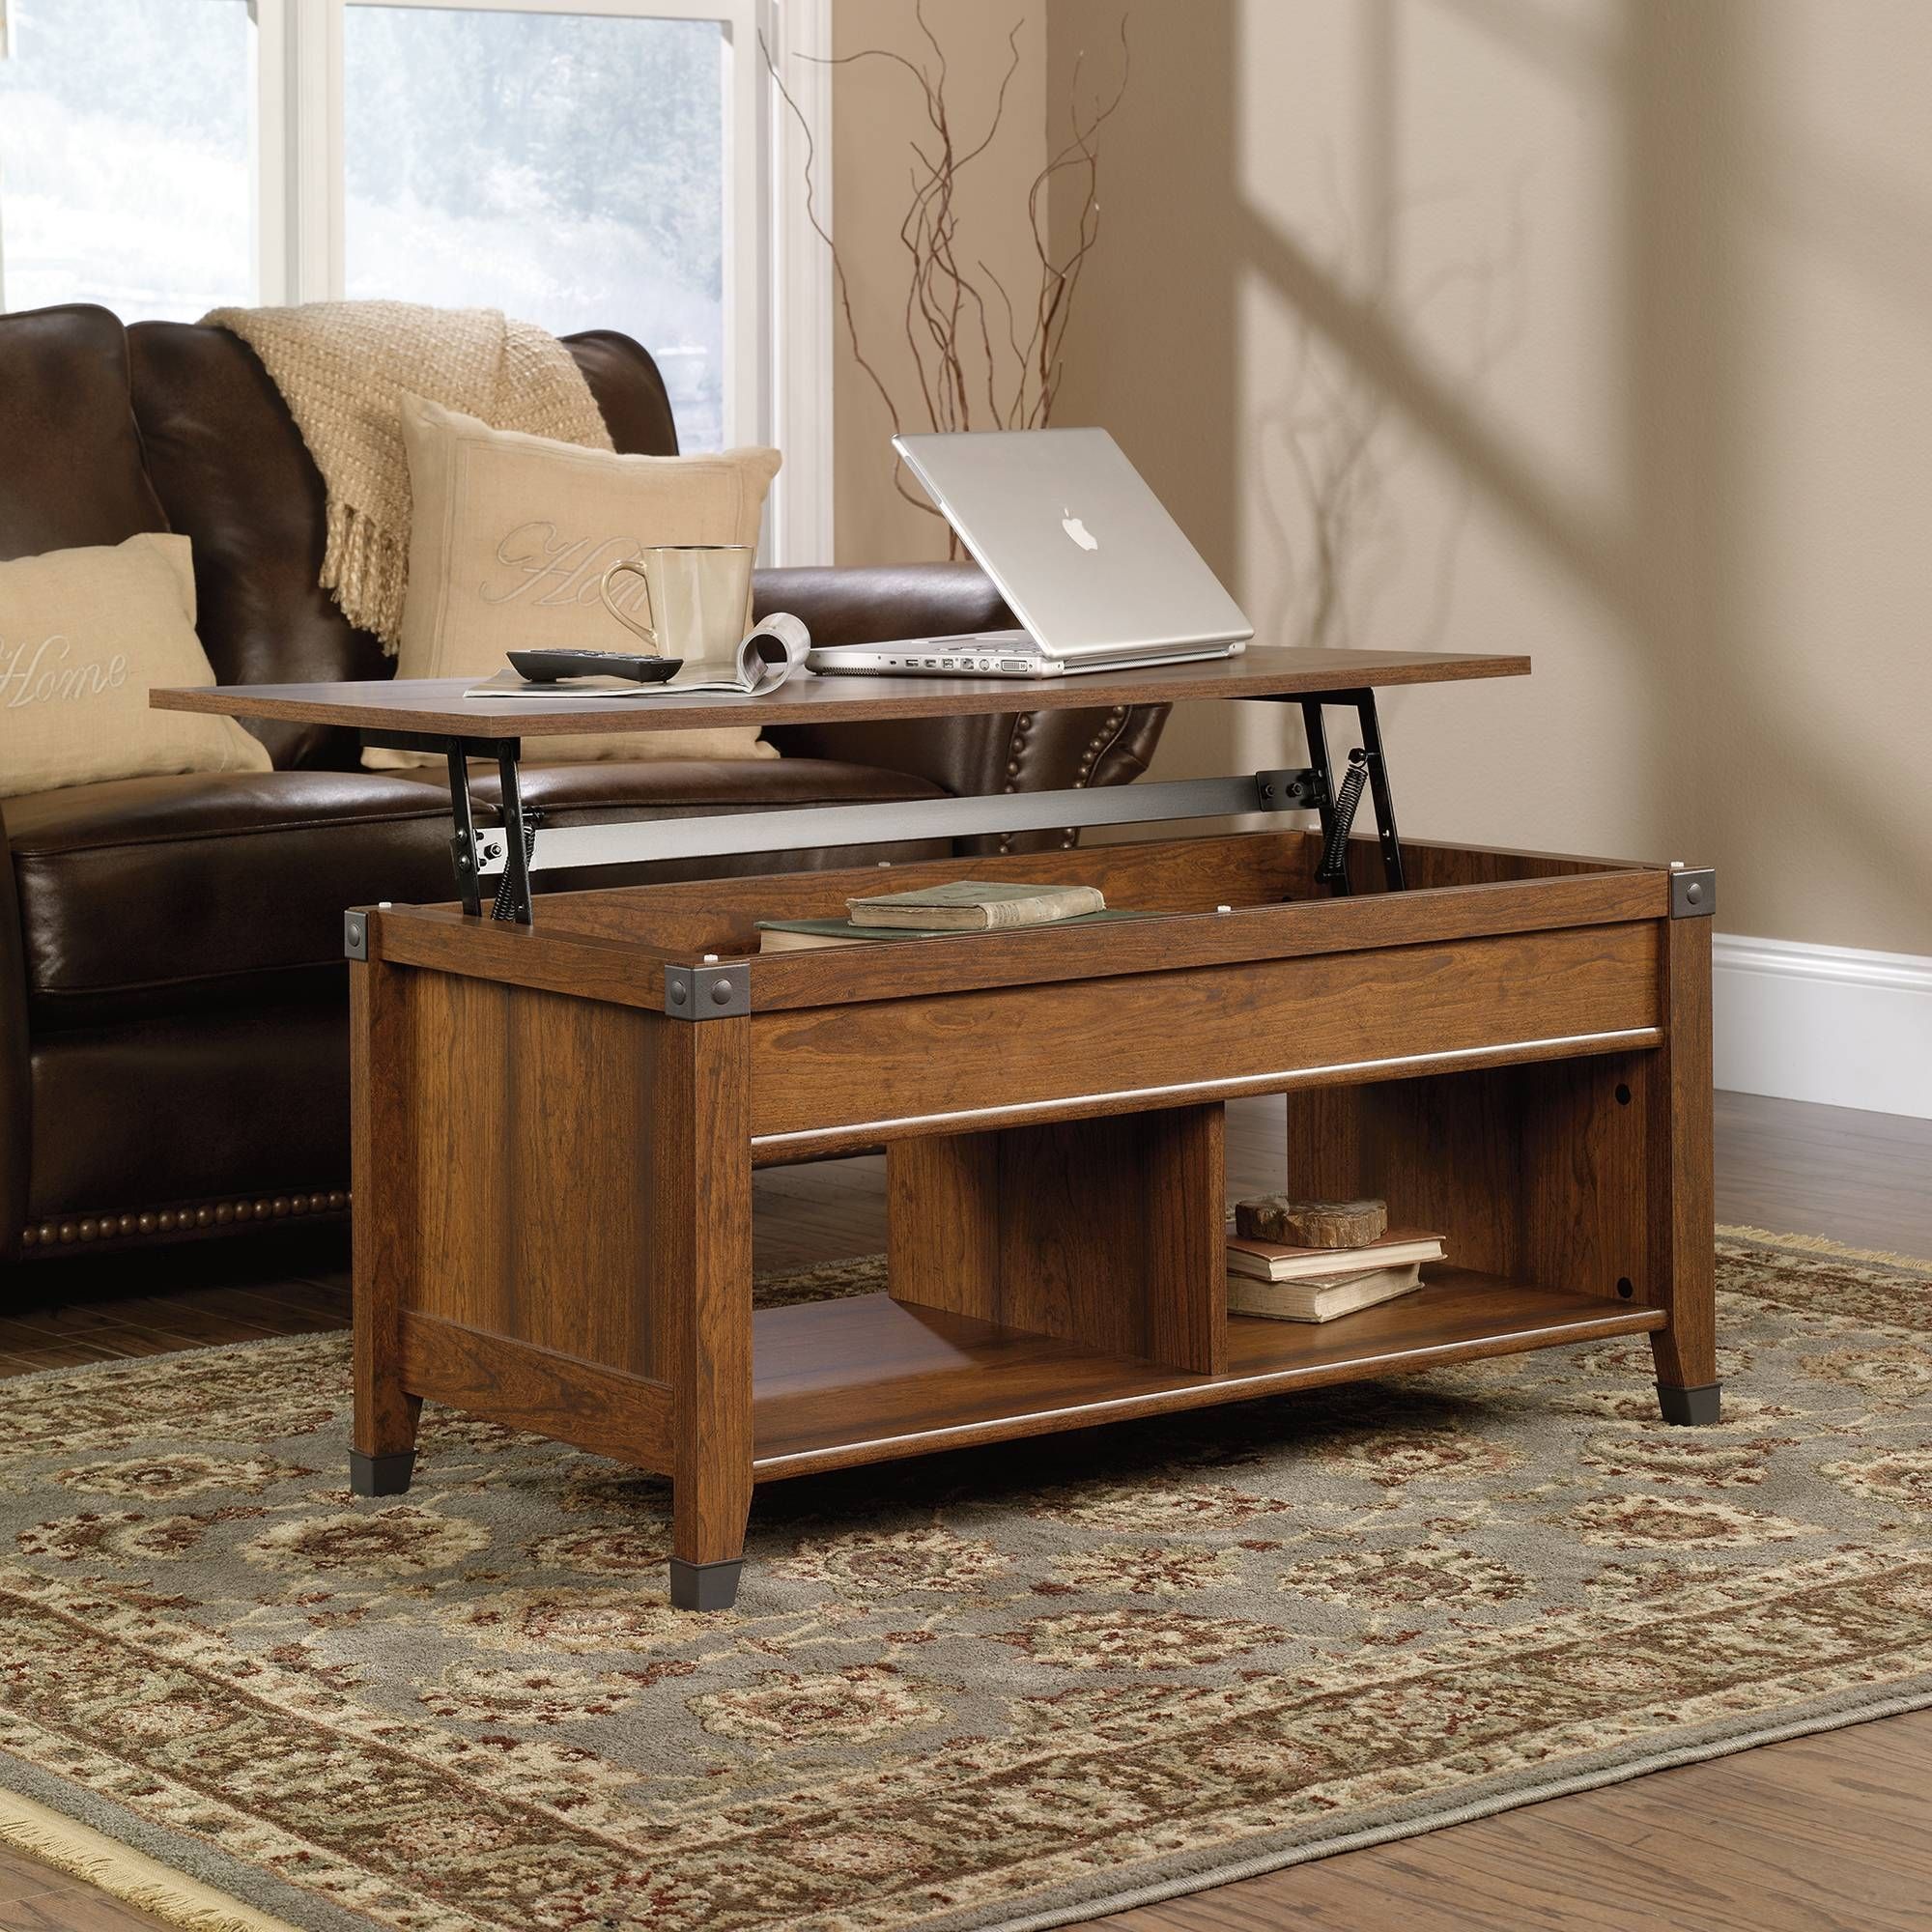 Carson Forge | Lift Top Coffee Table | 414444 | Sauder For Coffee Table With Raised Top (View 7 of 30)